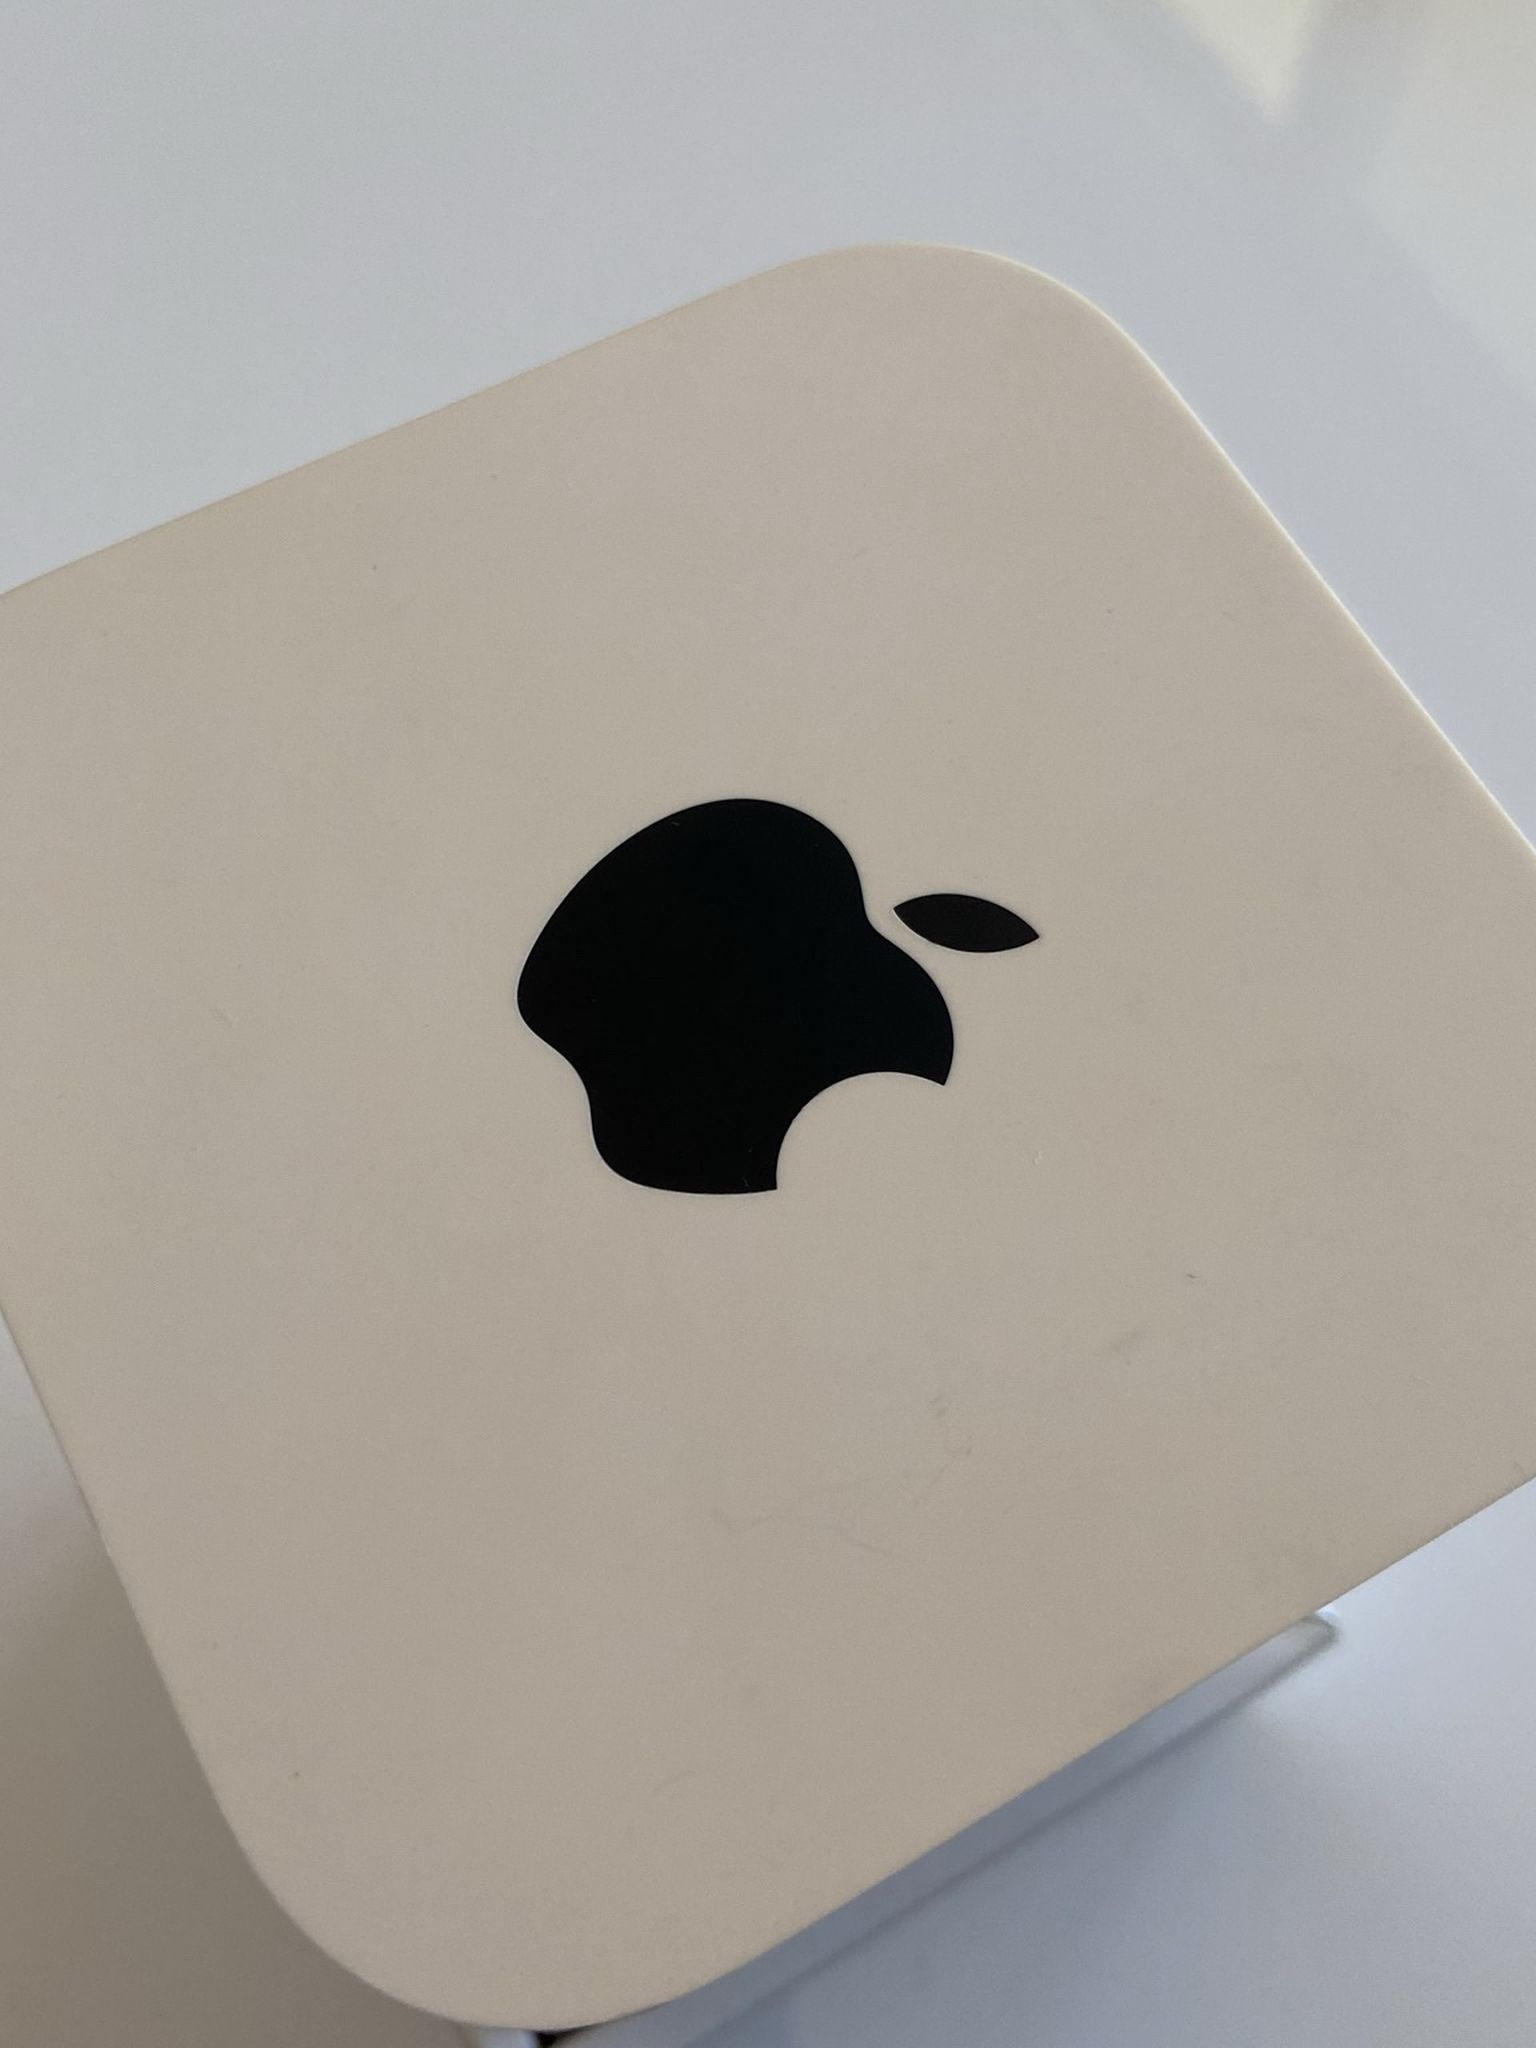 Apple AirPort Extreme Wireless Router